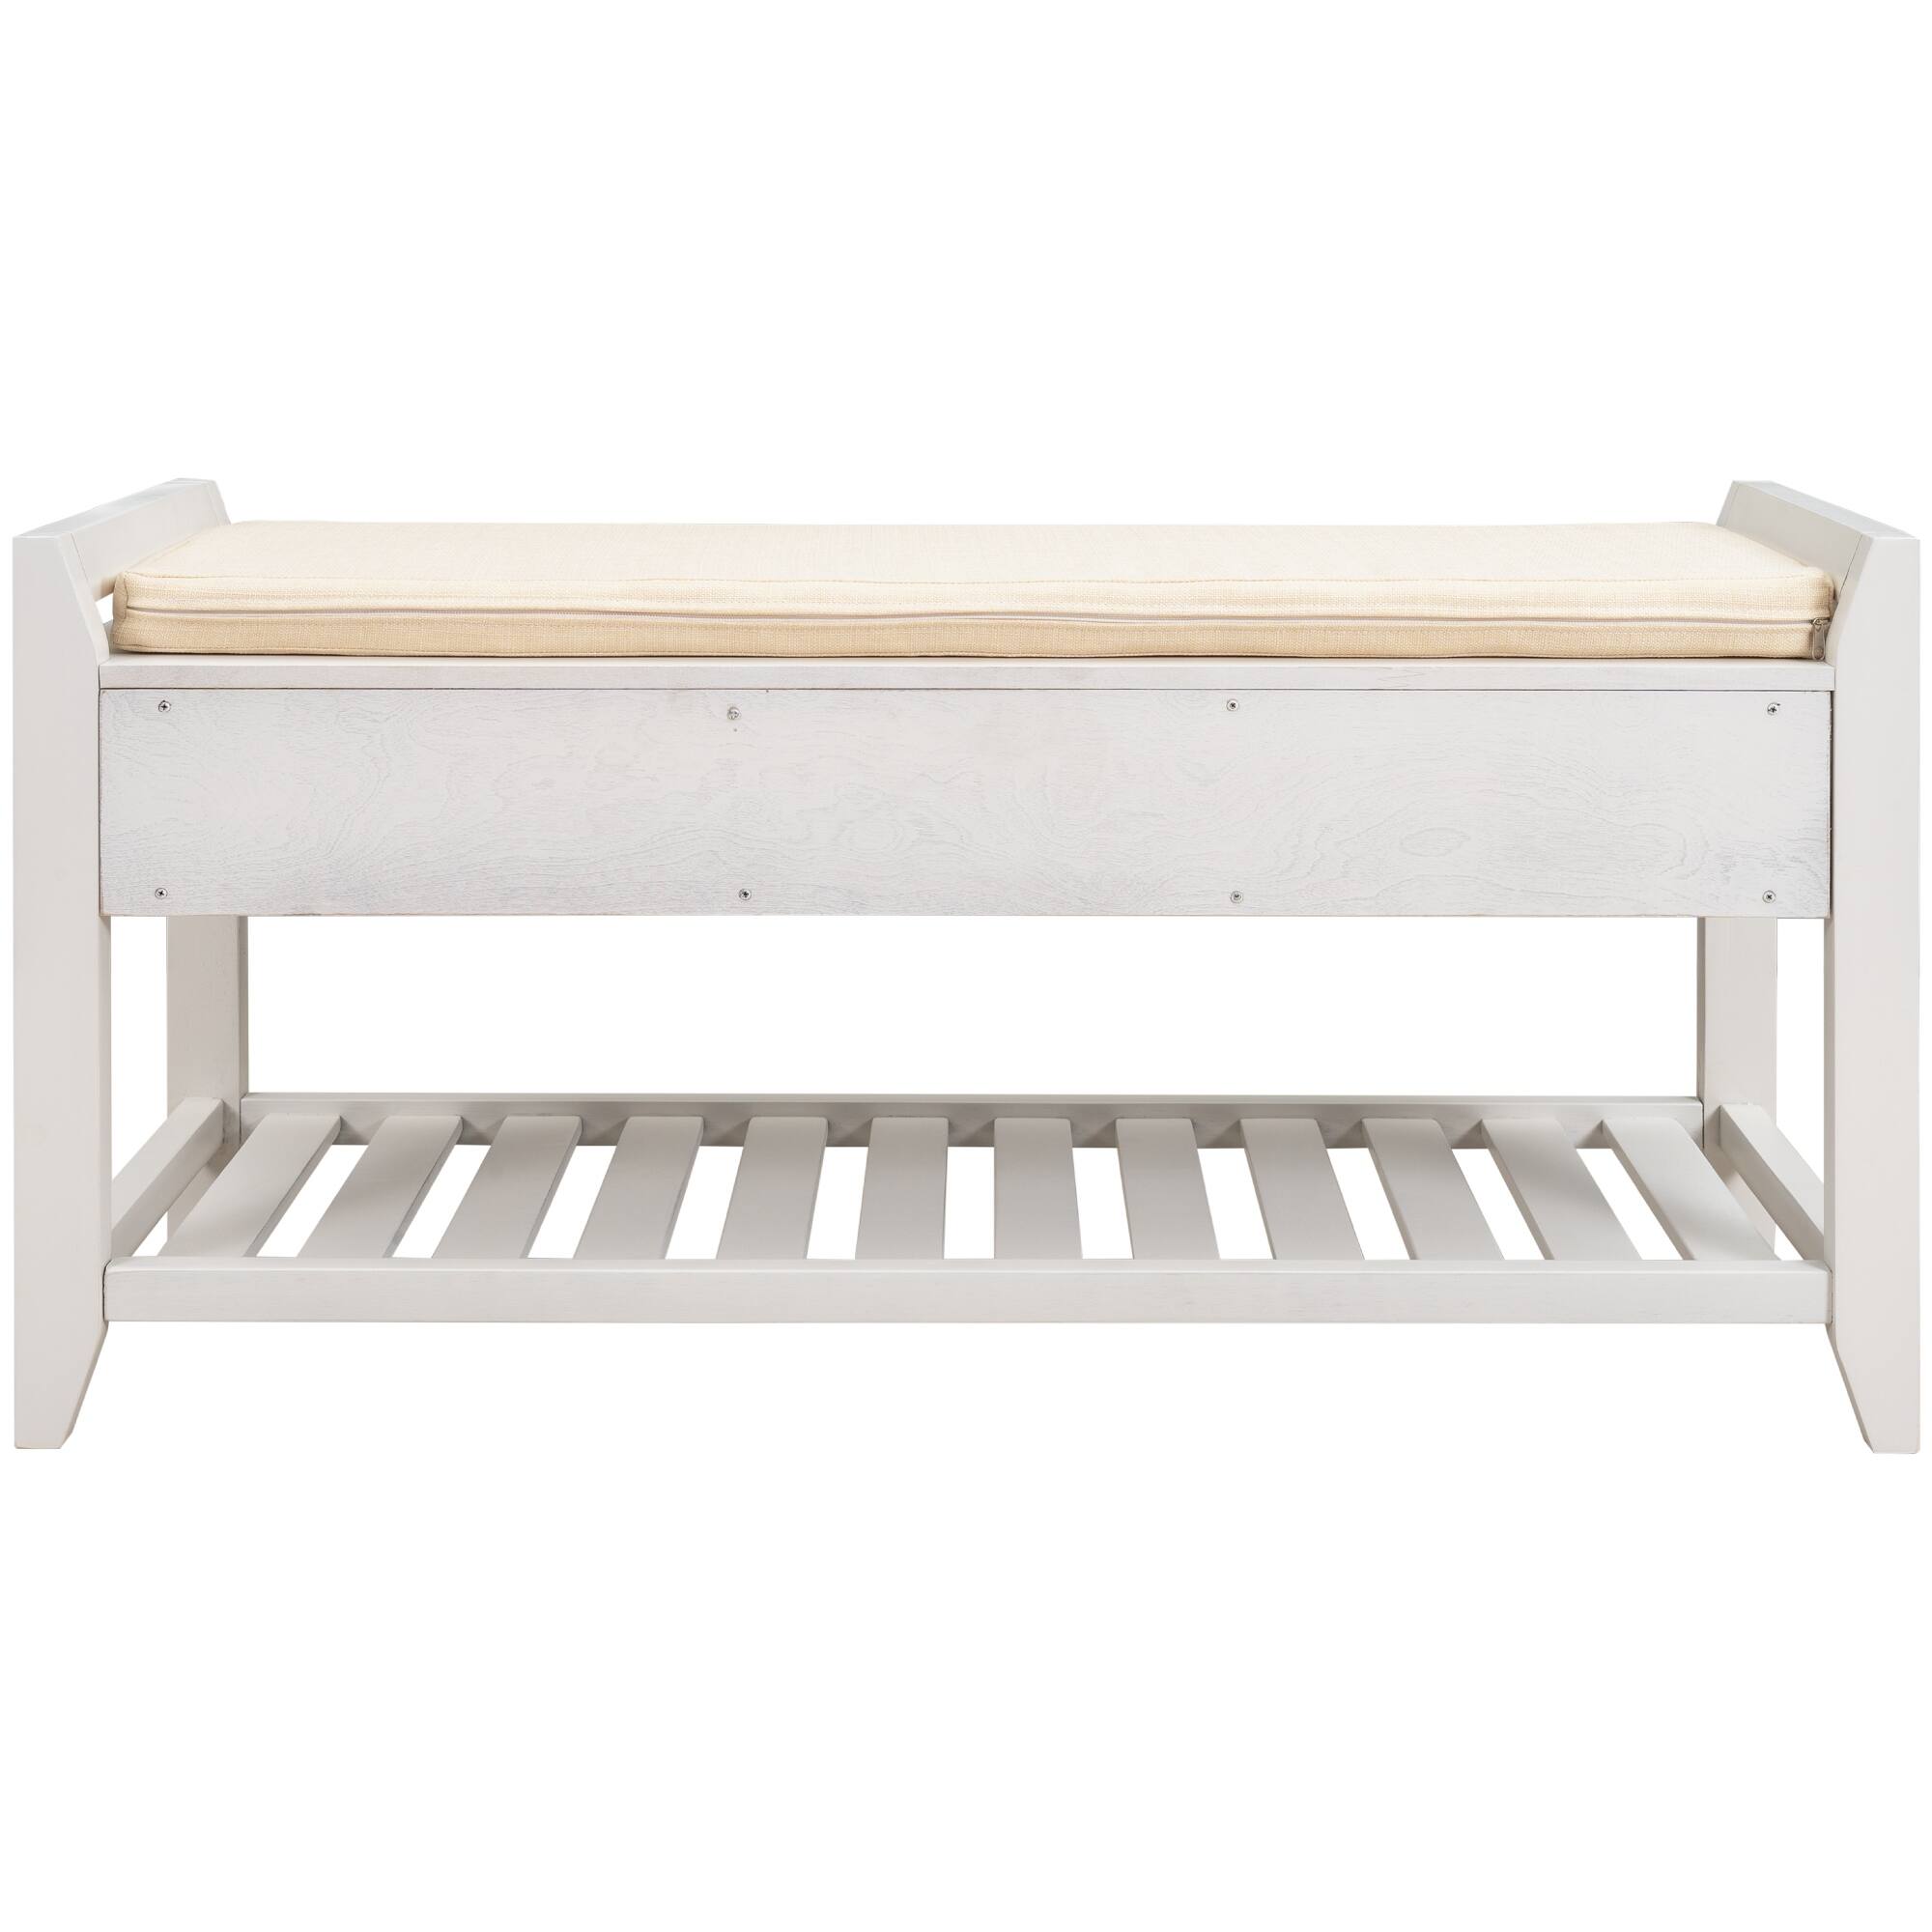 Shoe Rack with Cushioned Seat and Drawers, Multipurpose Entryway Storage Bench